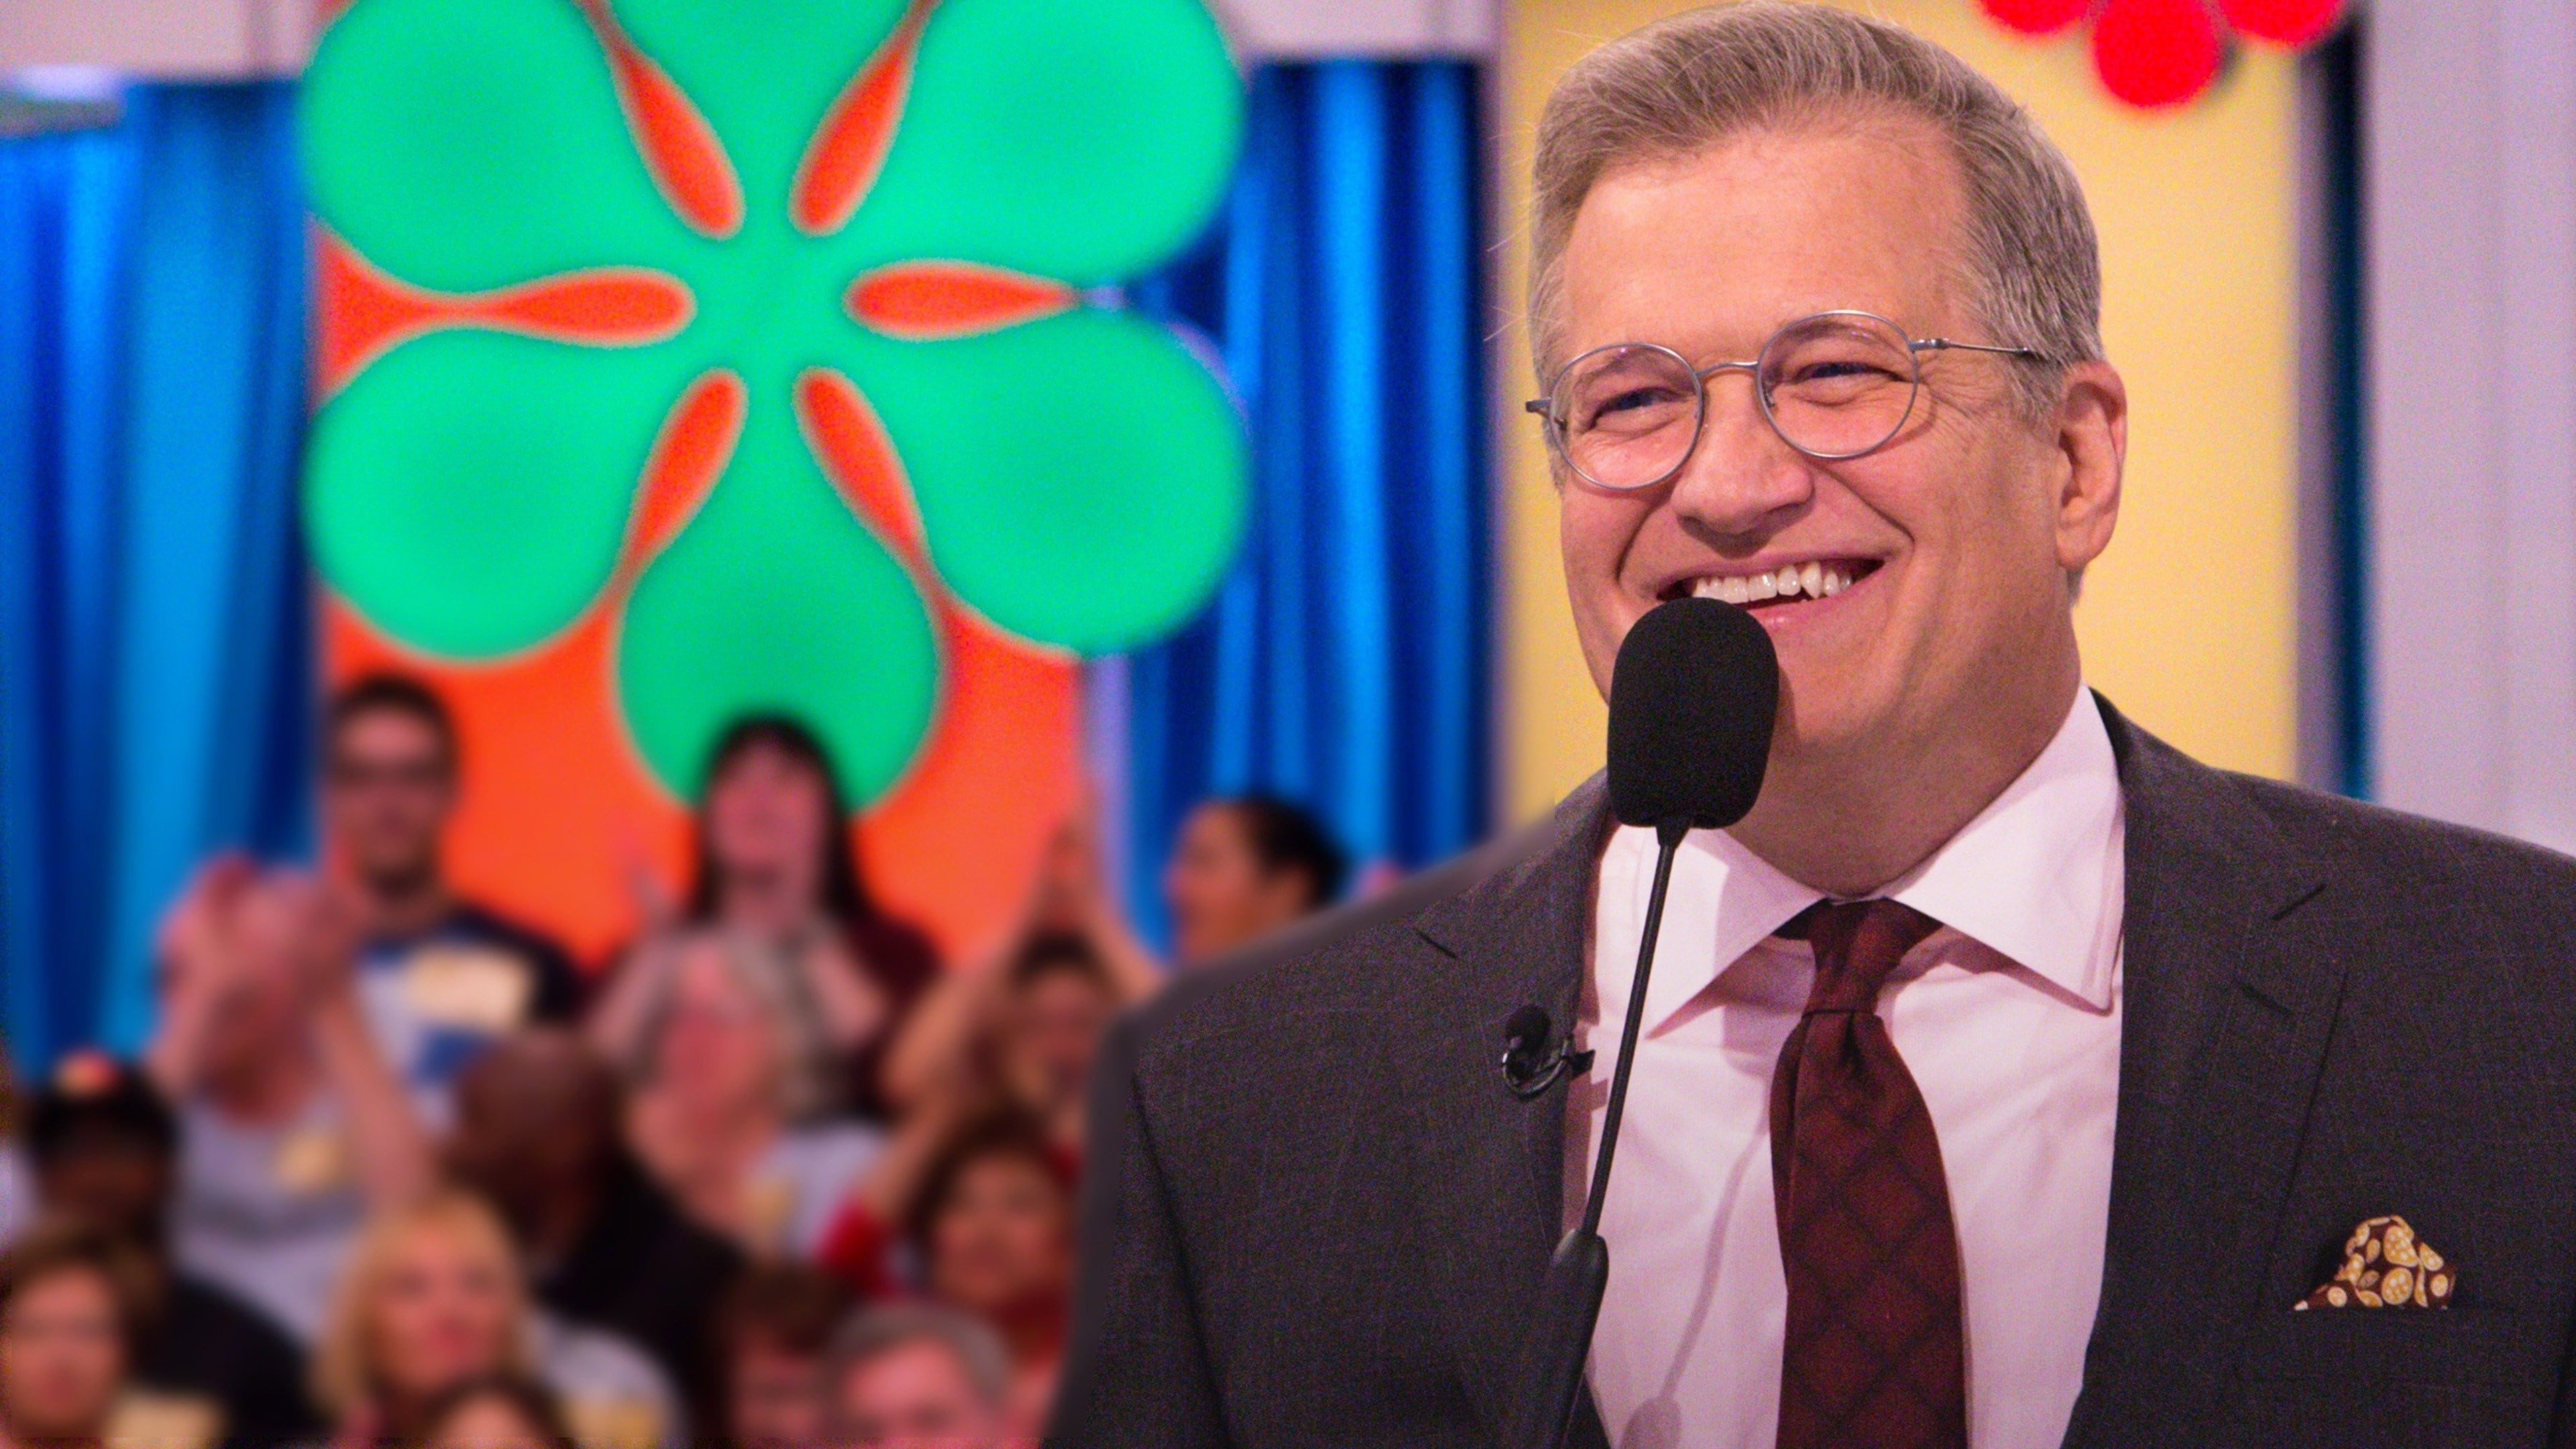 The Price Is Right - Season 3 Episode 188 : The Price Is Right Season 3 Episode 188